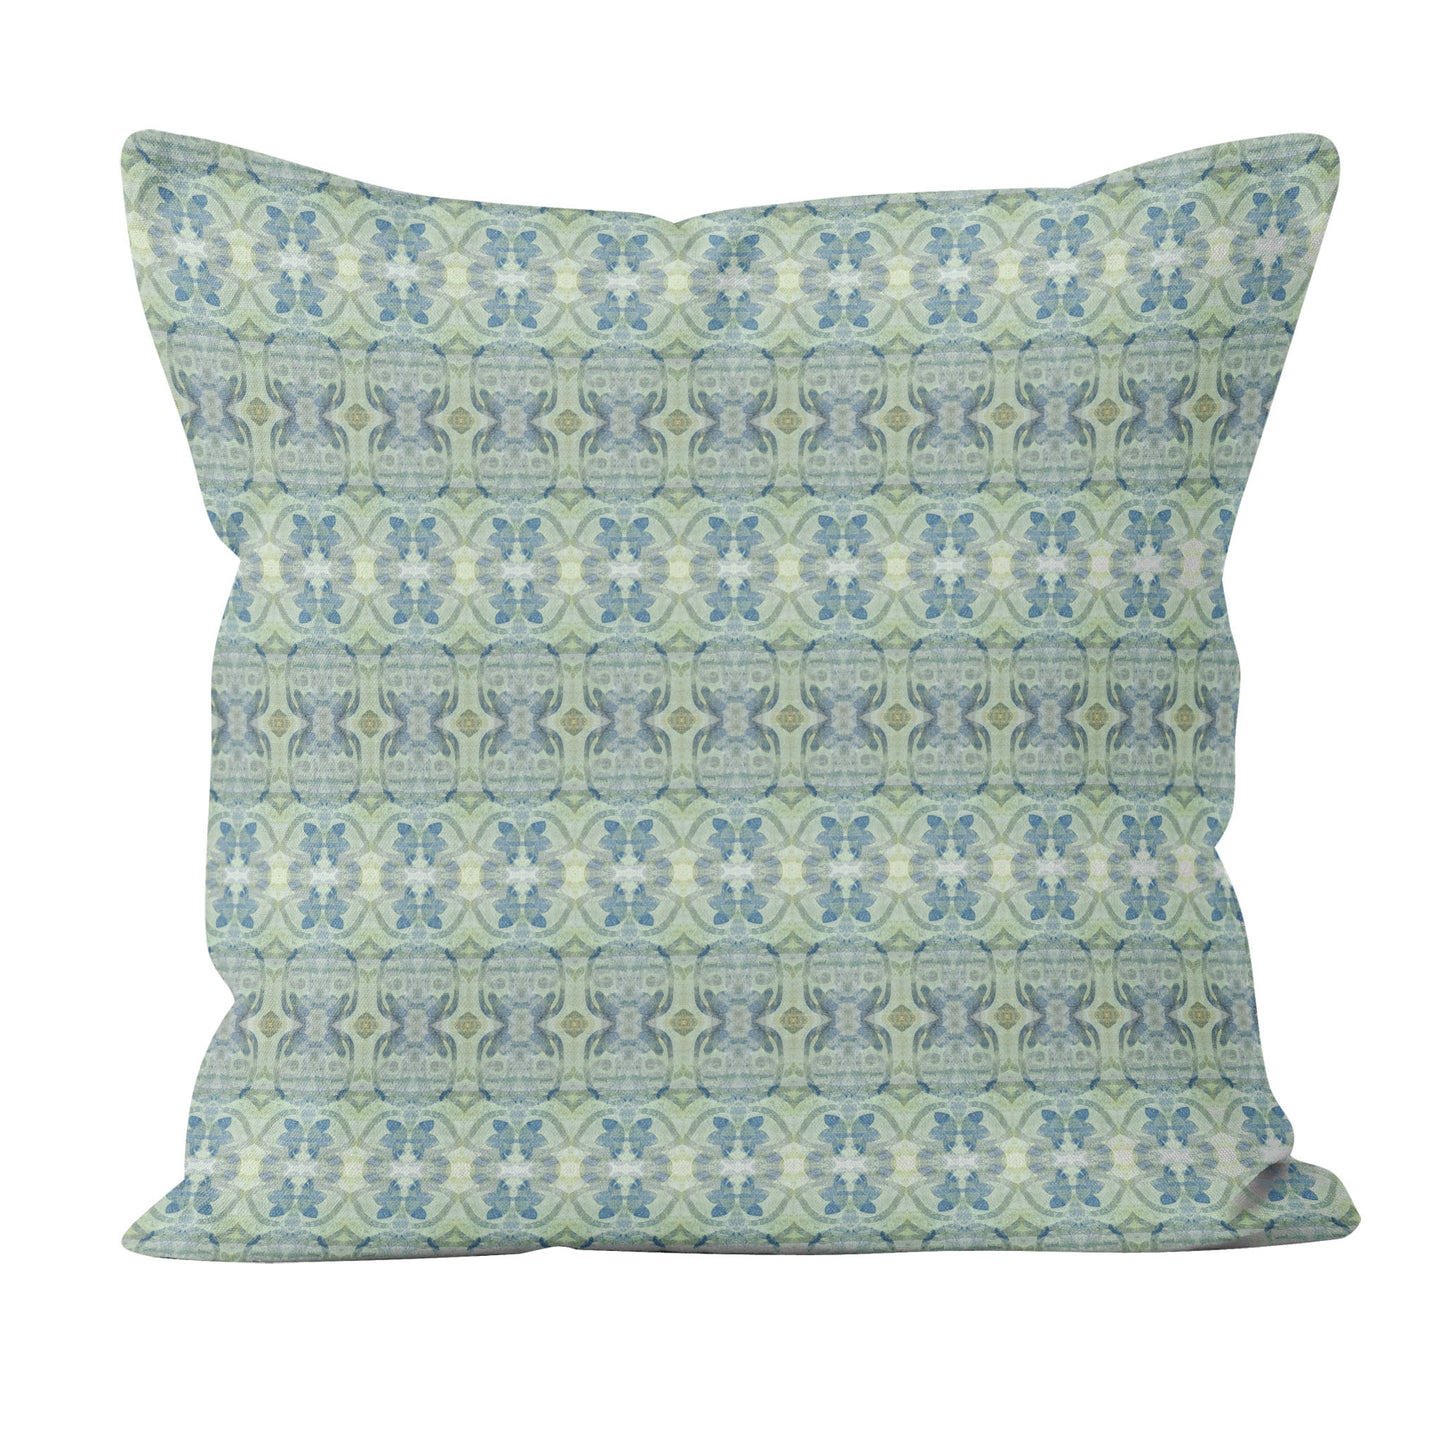 Cotton canvas throw pillow featuring an abstract blue and green pattern.